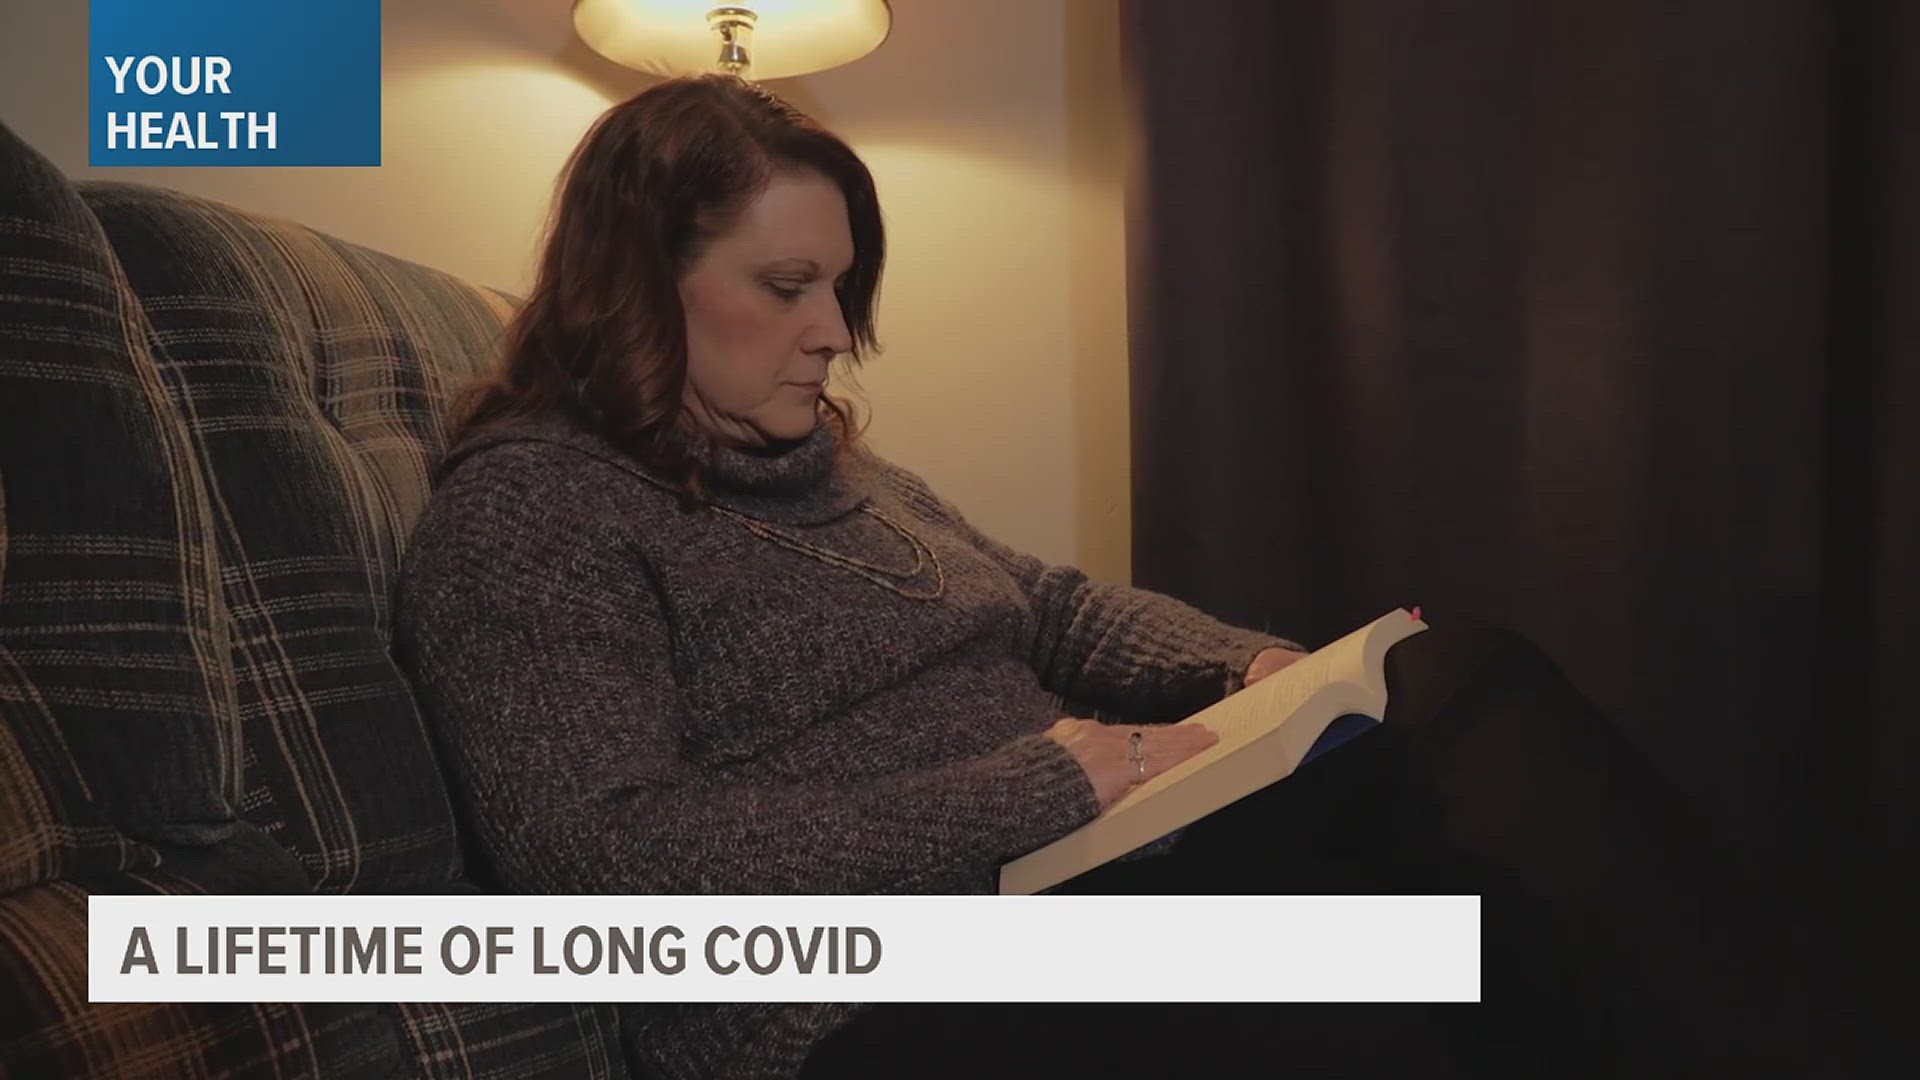 In fact, people who suffer long-COVID are at an increased risk for 44 conditions of the brain.